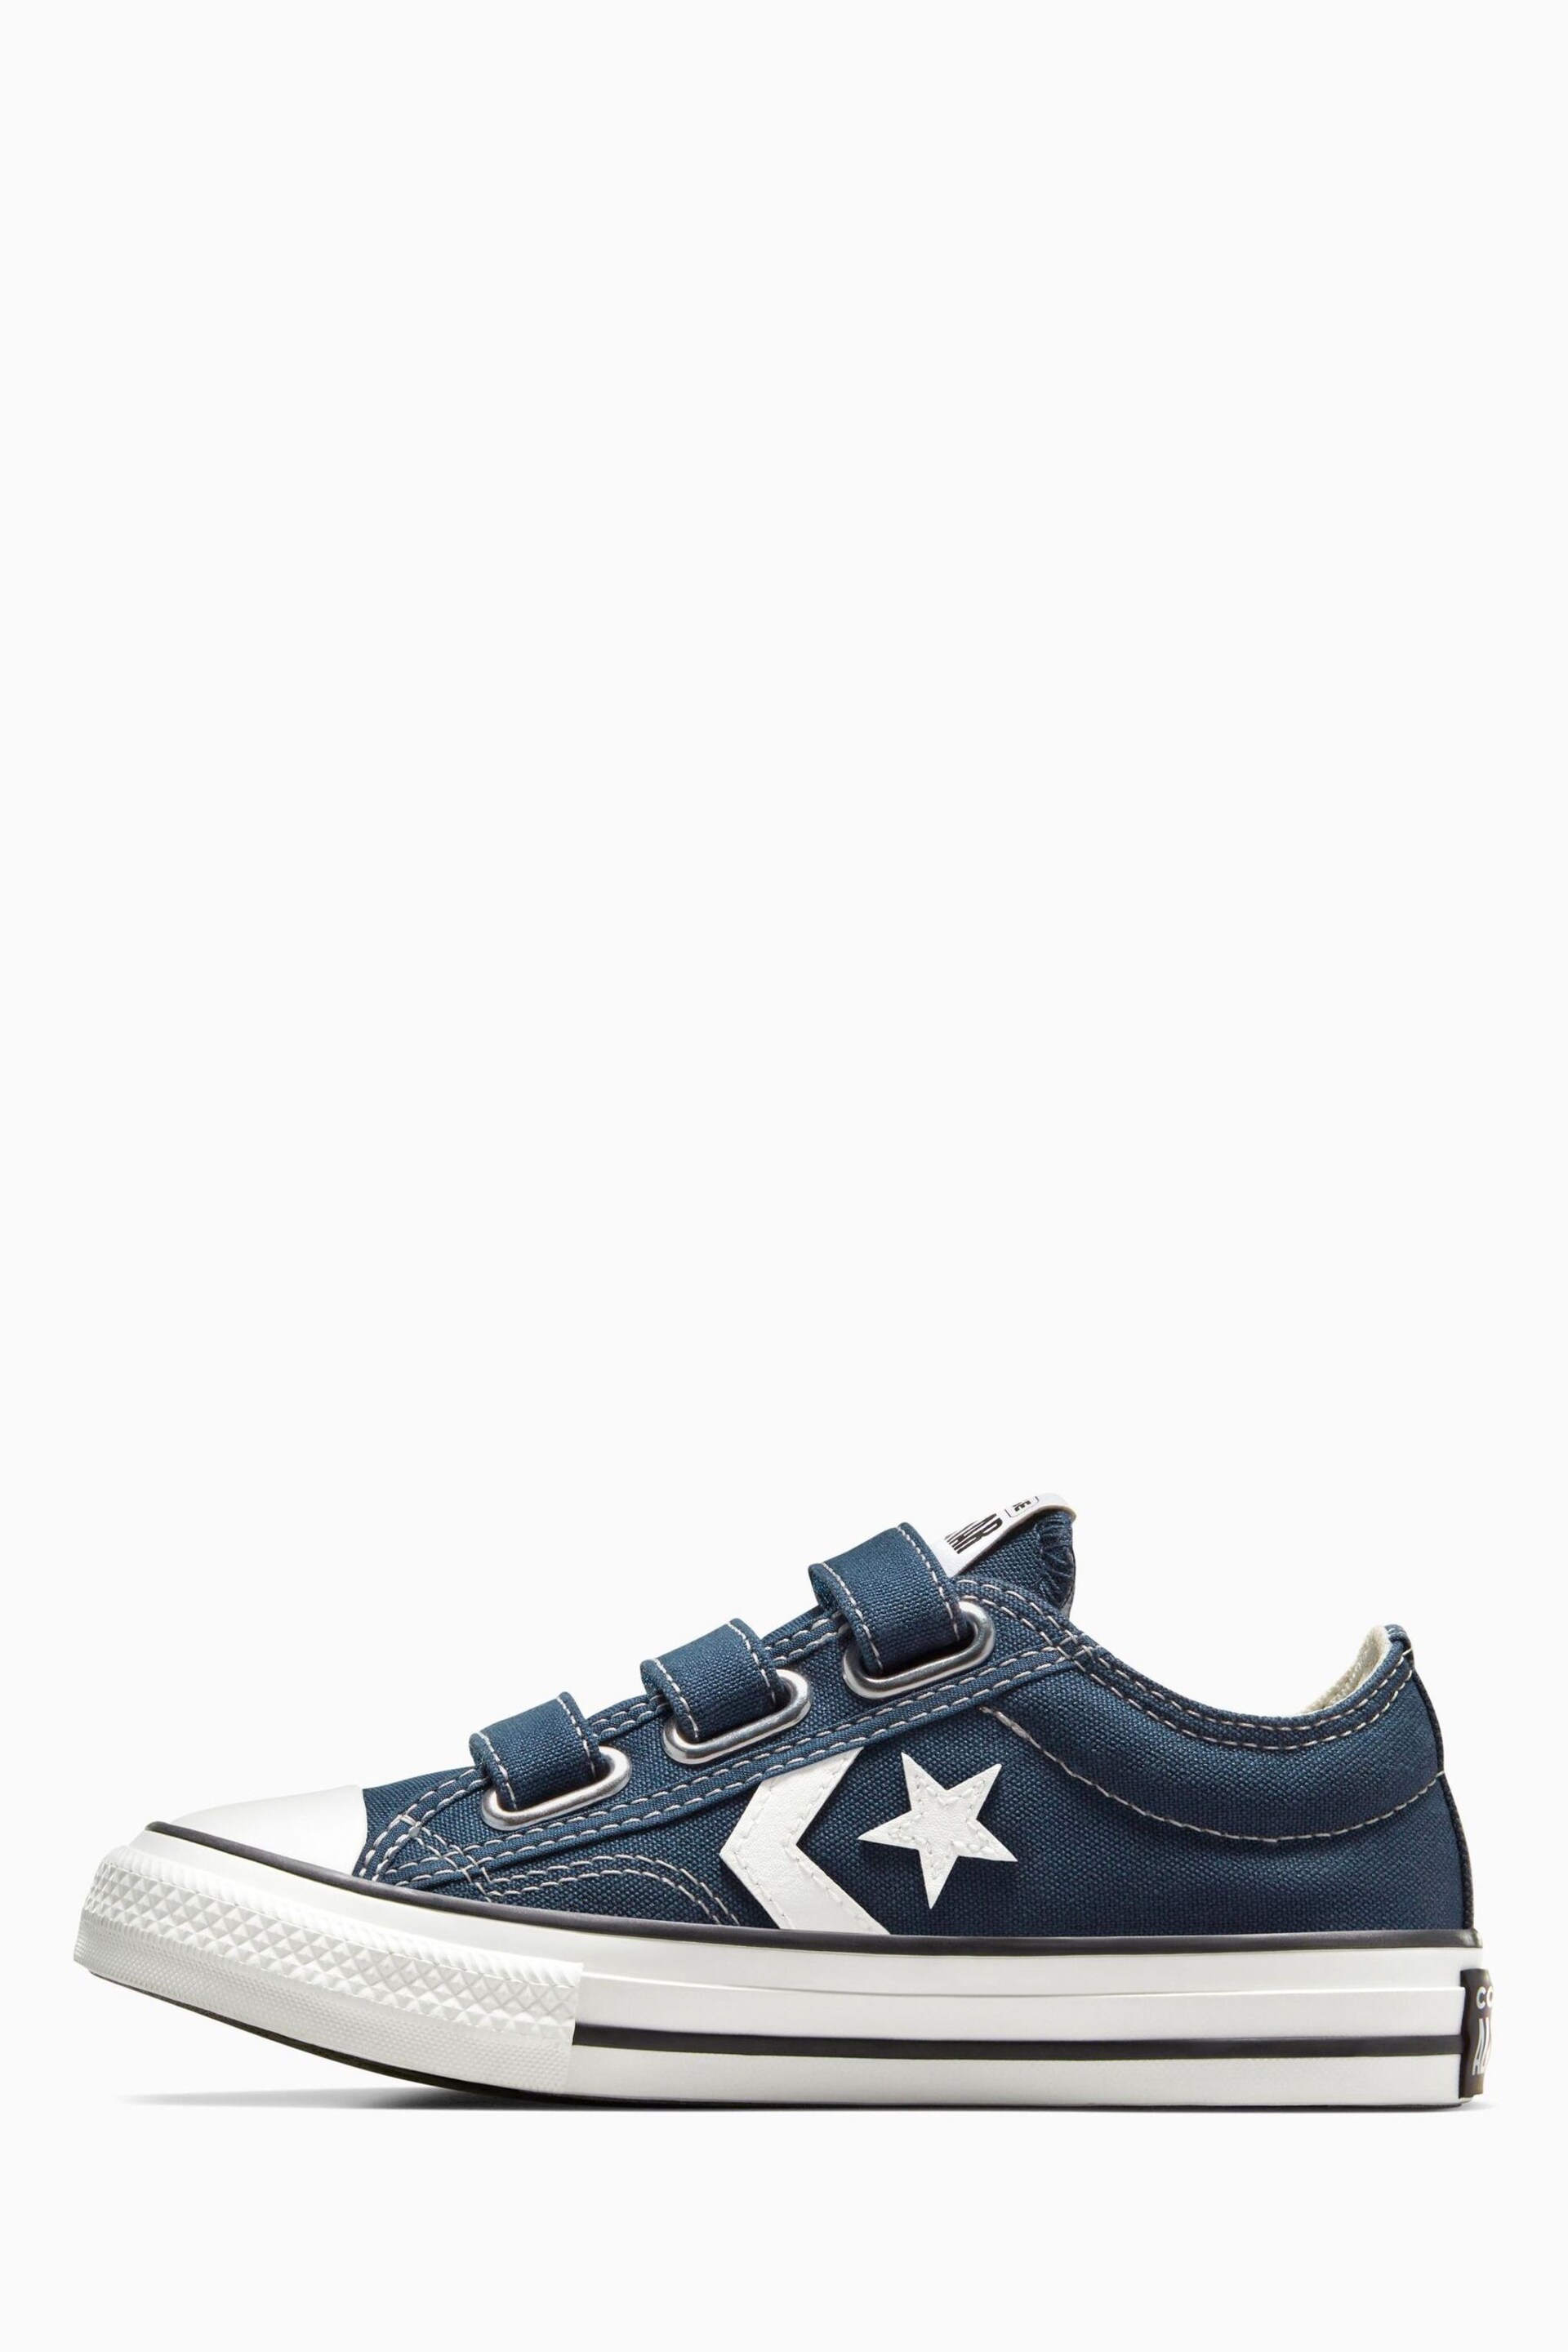 Converse Blue Junior Star Player 76 3V Easy On Trainers - Image 4 of 11